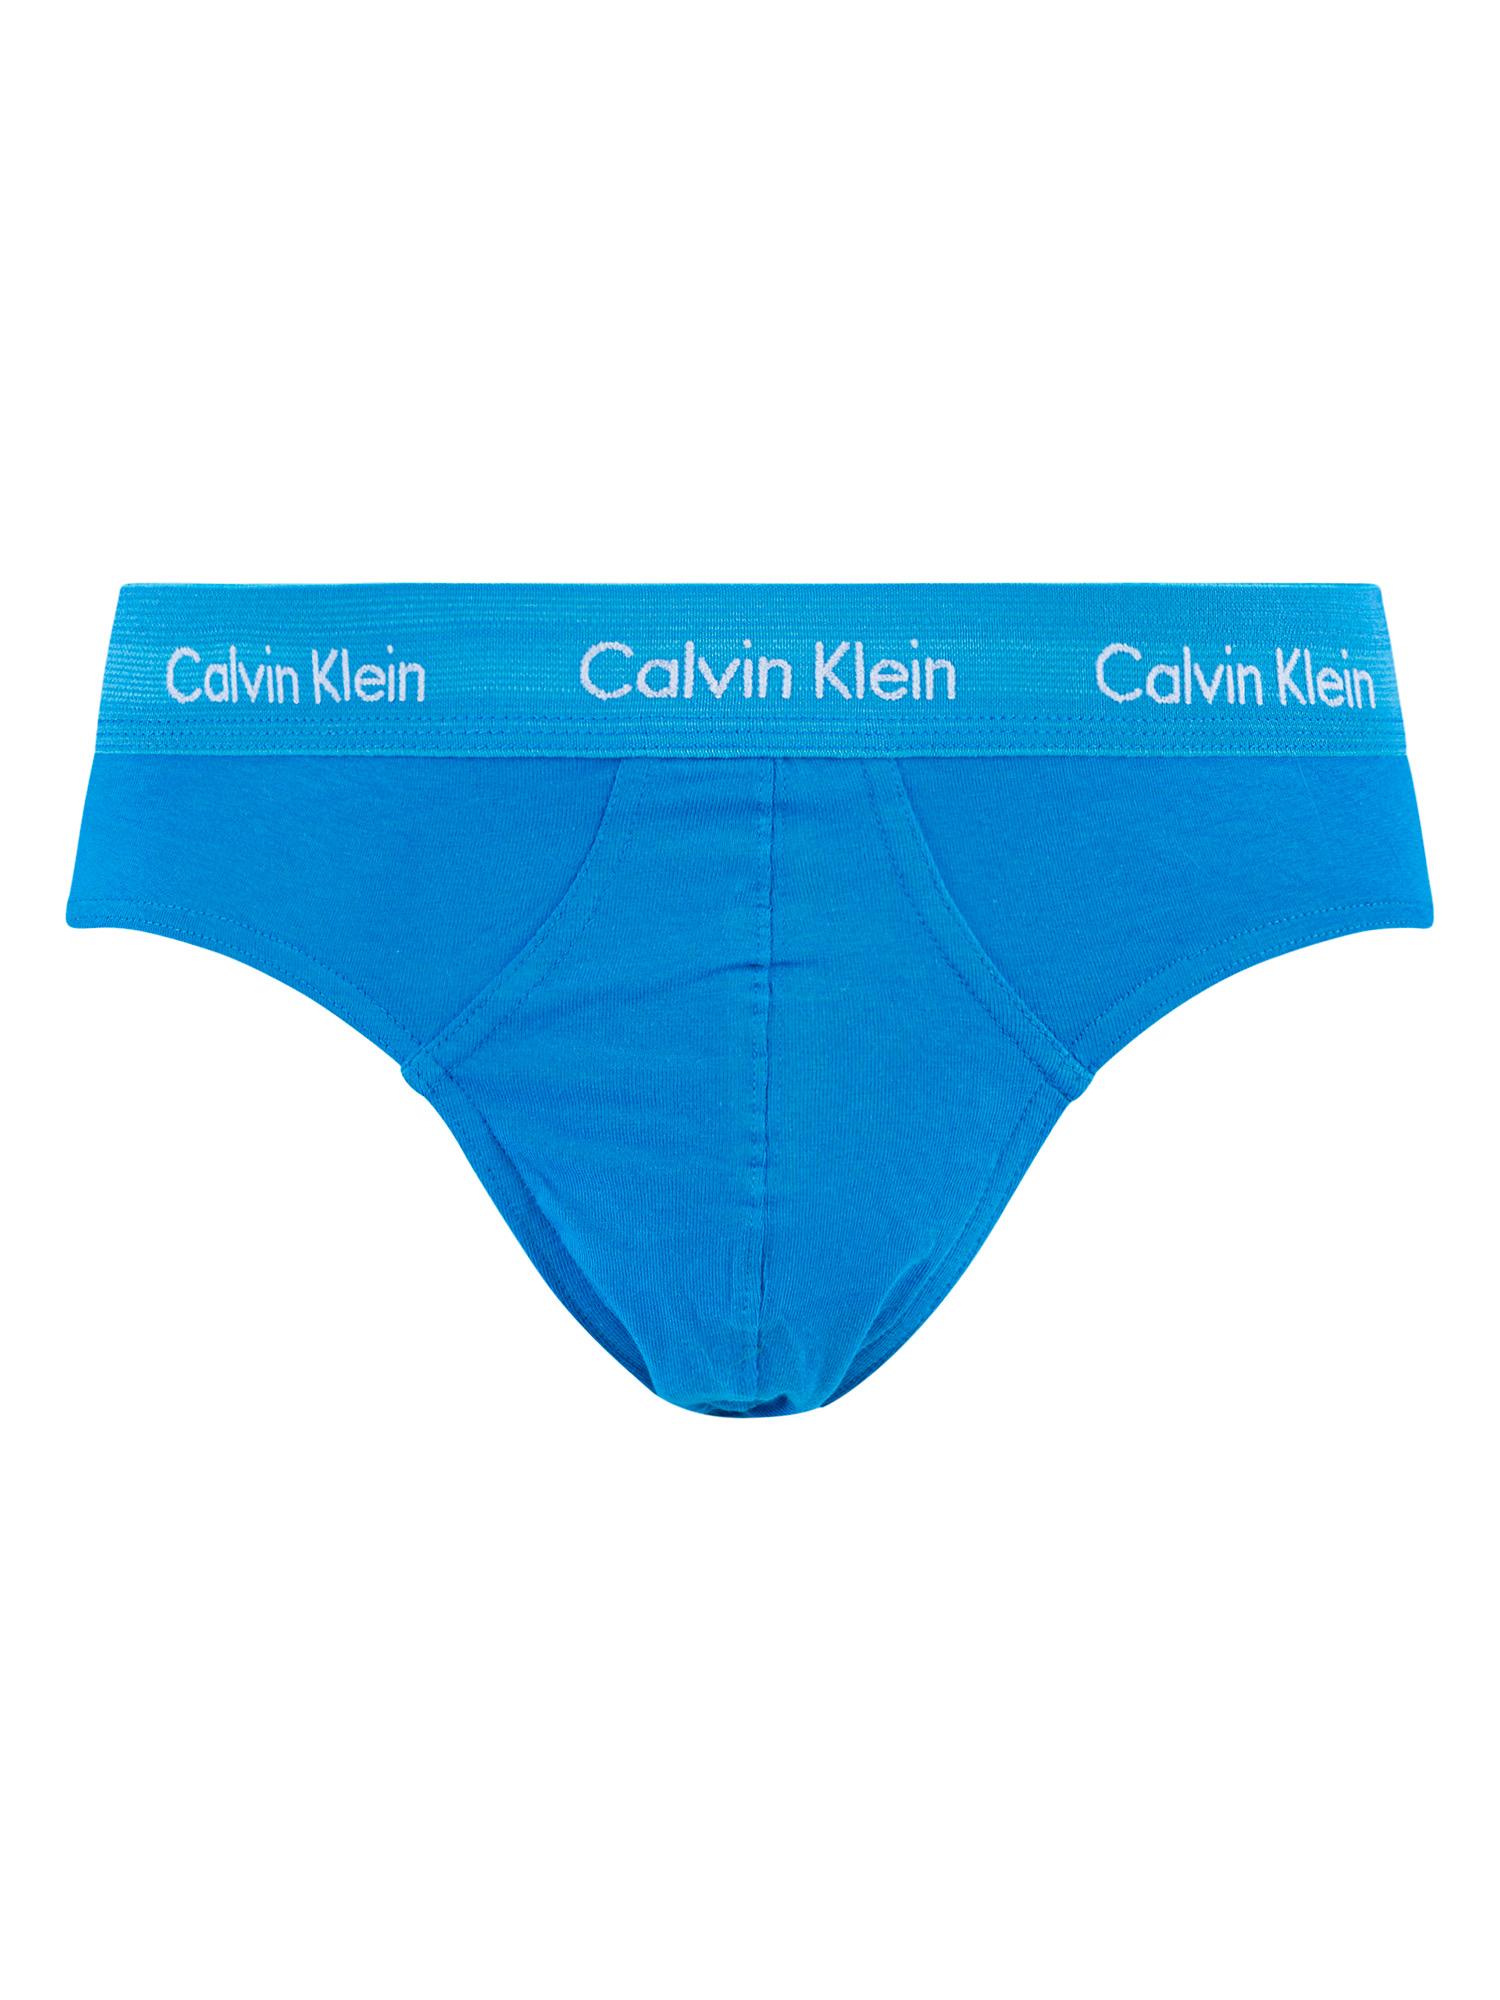 Calvin Klein 5 Pack This Is Love Hip Briefs in Yellow for Men